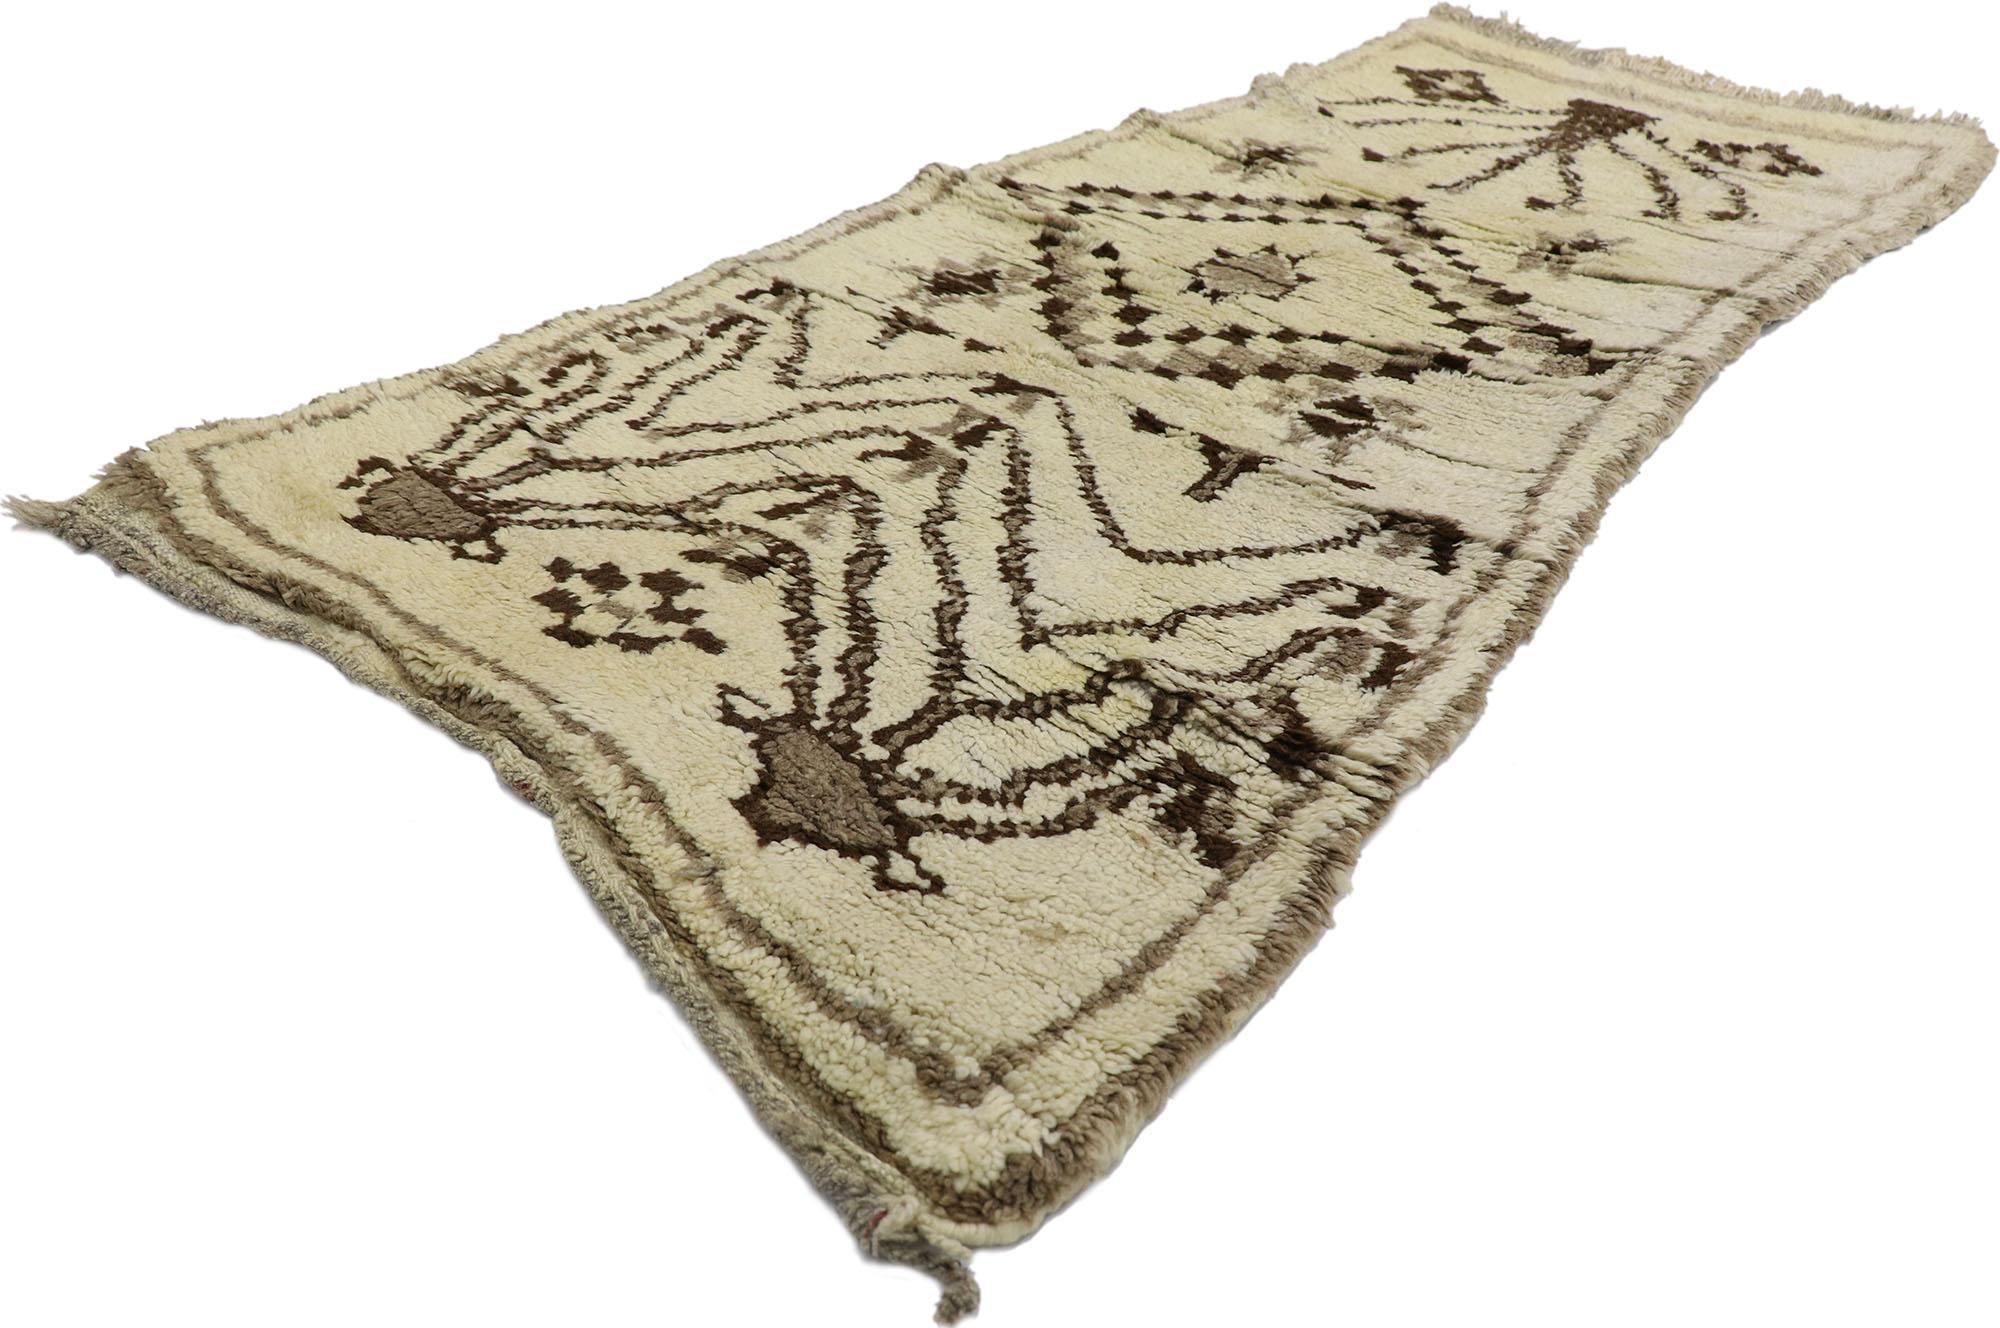 21573 Vintage Berber Moroccan Azilal rug with Tribal Style 02'07 x 05'06. With its simplicity, tribal style, incredible detail and texture, this hand knotted wool vintage Berber Moroccan Azilal rug is a captivating vision of woven beauty. The